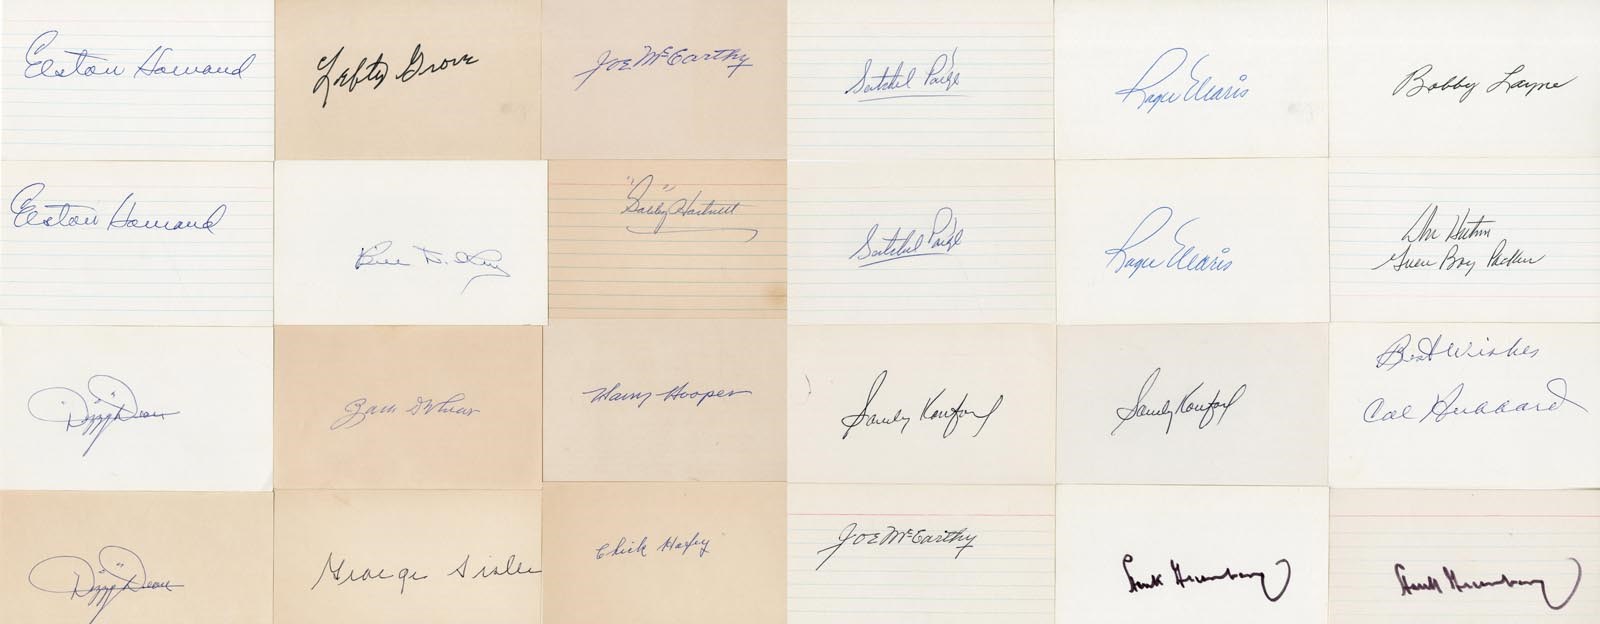 - Hall of Famers and Stars Signed Index Card Collection with Major Stars (125+)